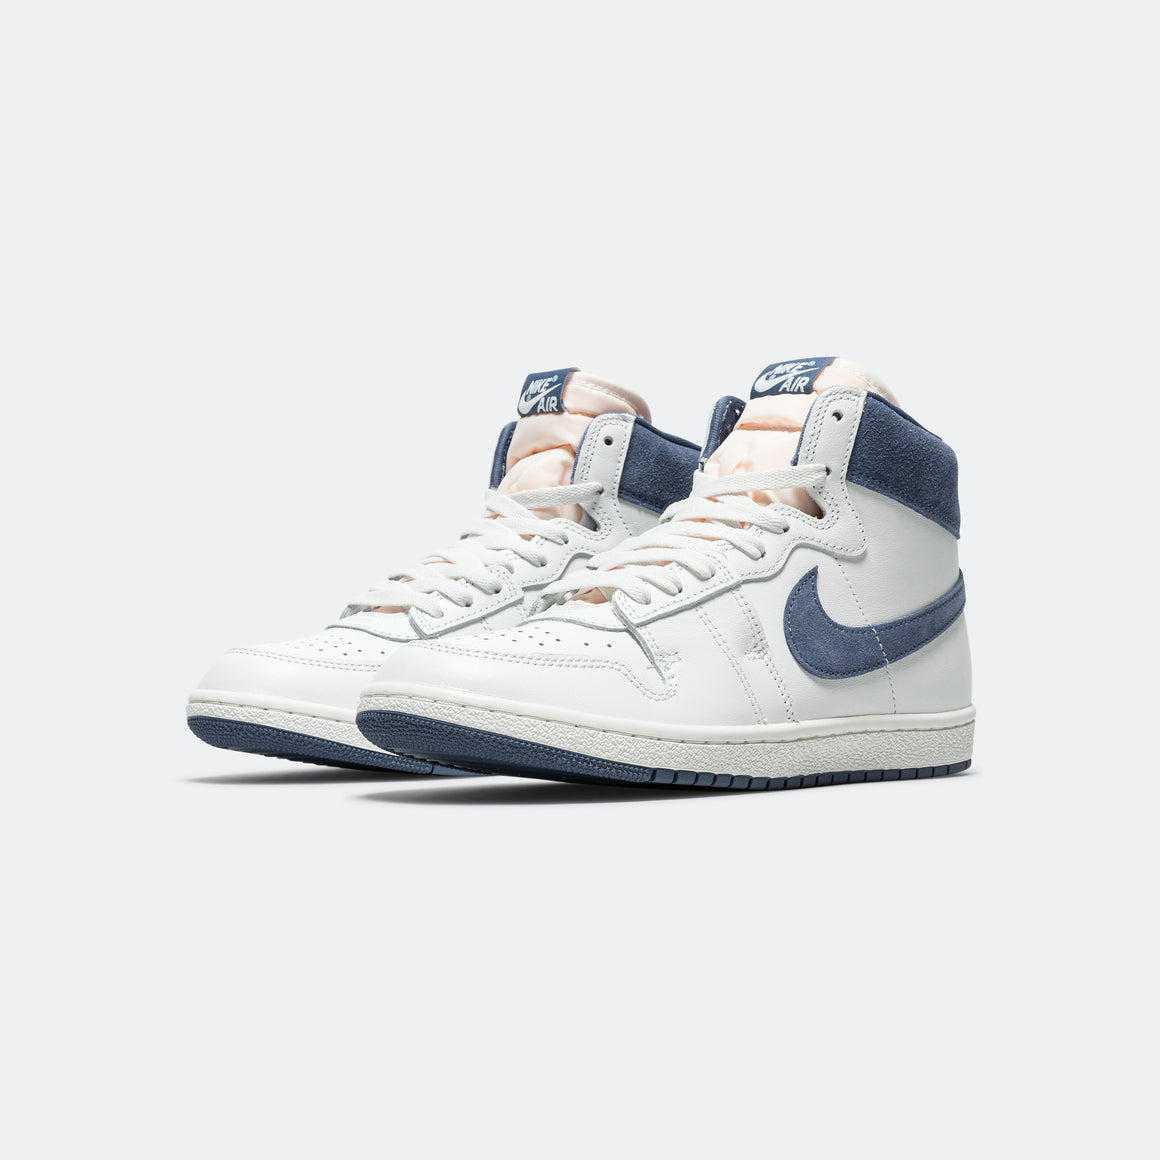 Jordan - Air Ship PE SP - Summit White/Diffused Blue - UP THERE